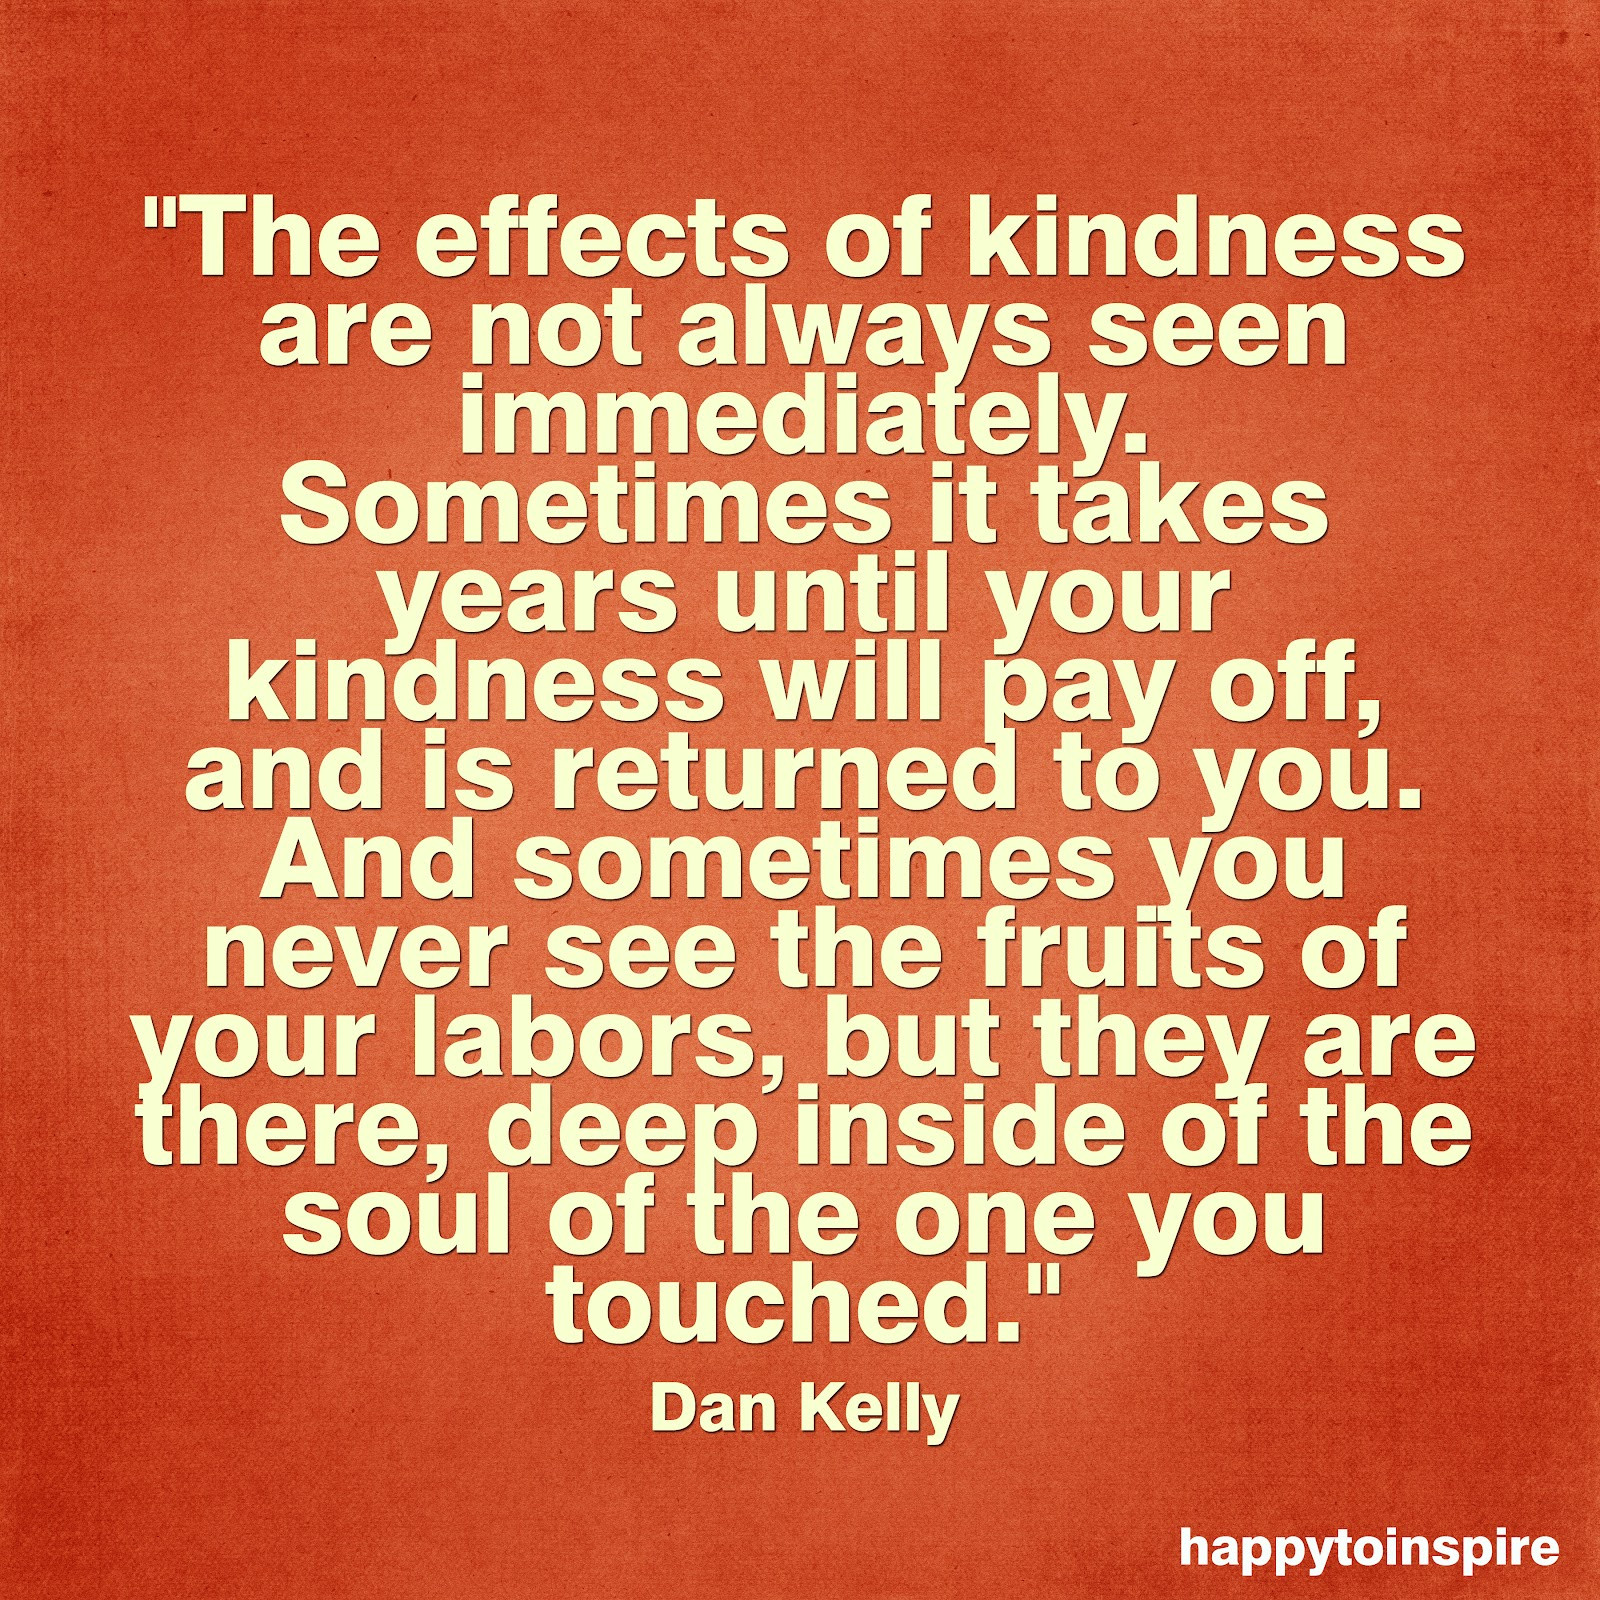 Quote Of Kindness
 Happy To Inspire Quote of the Day The effects of